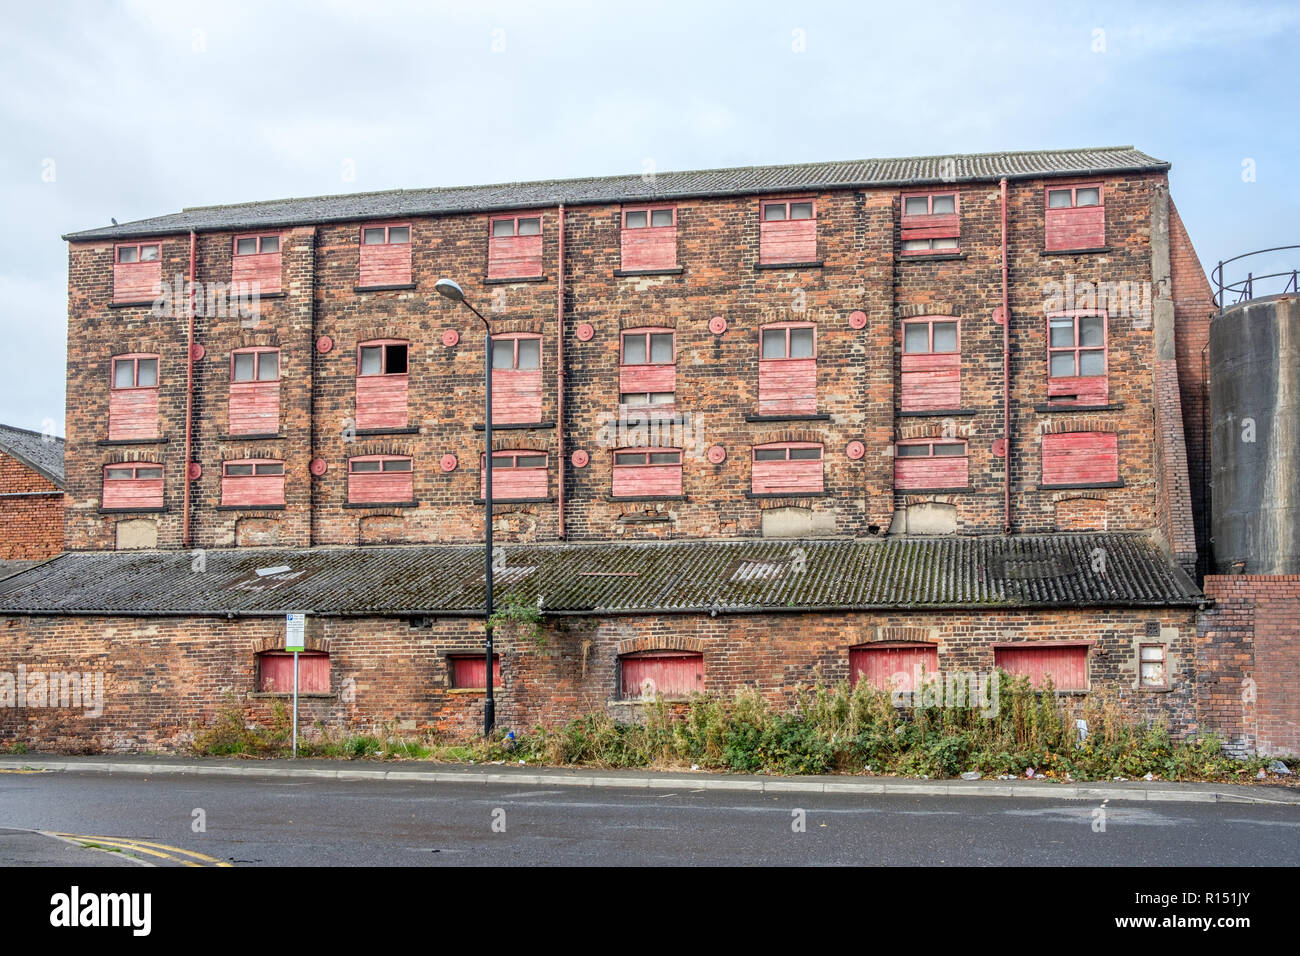 Old factory buildings in the vicinity of Granary Wharf in the city centre of Leeds, which is the largest town in West Yorkshire. Stock Photo